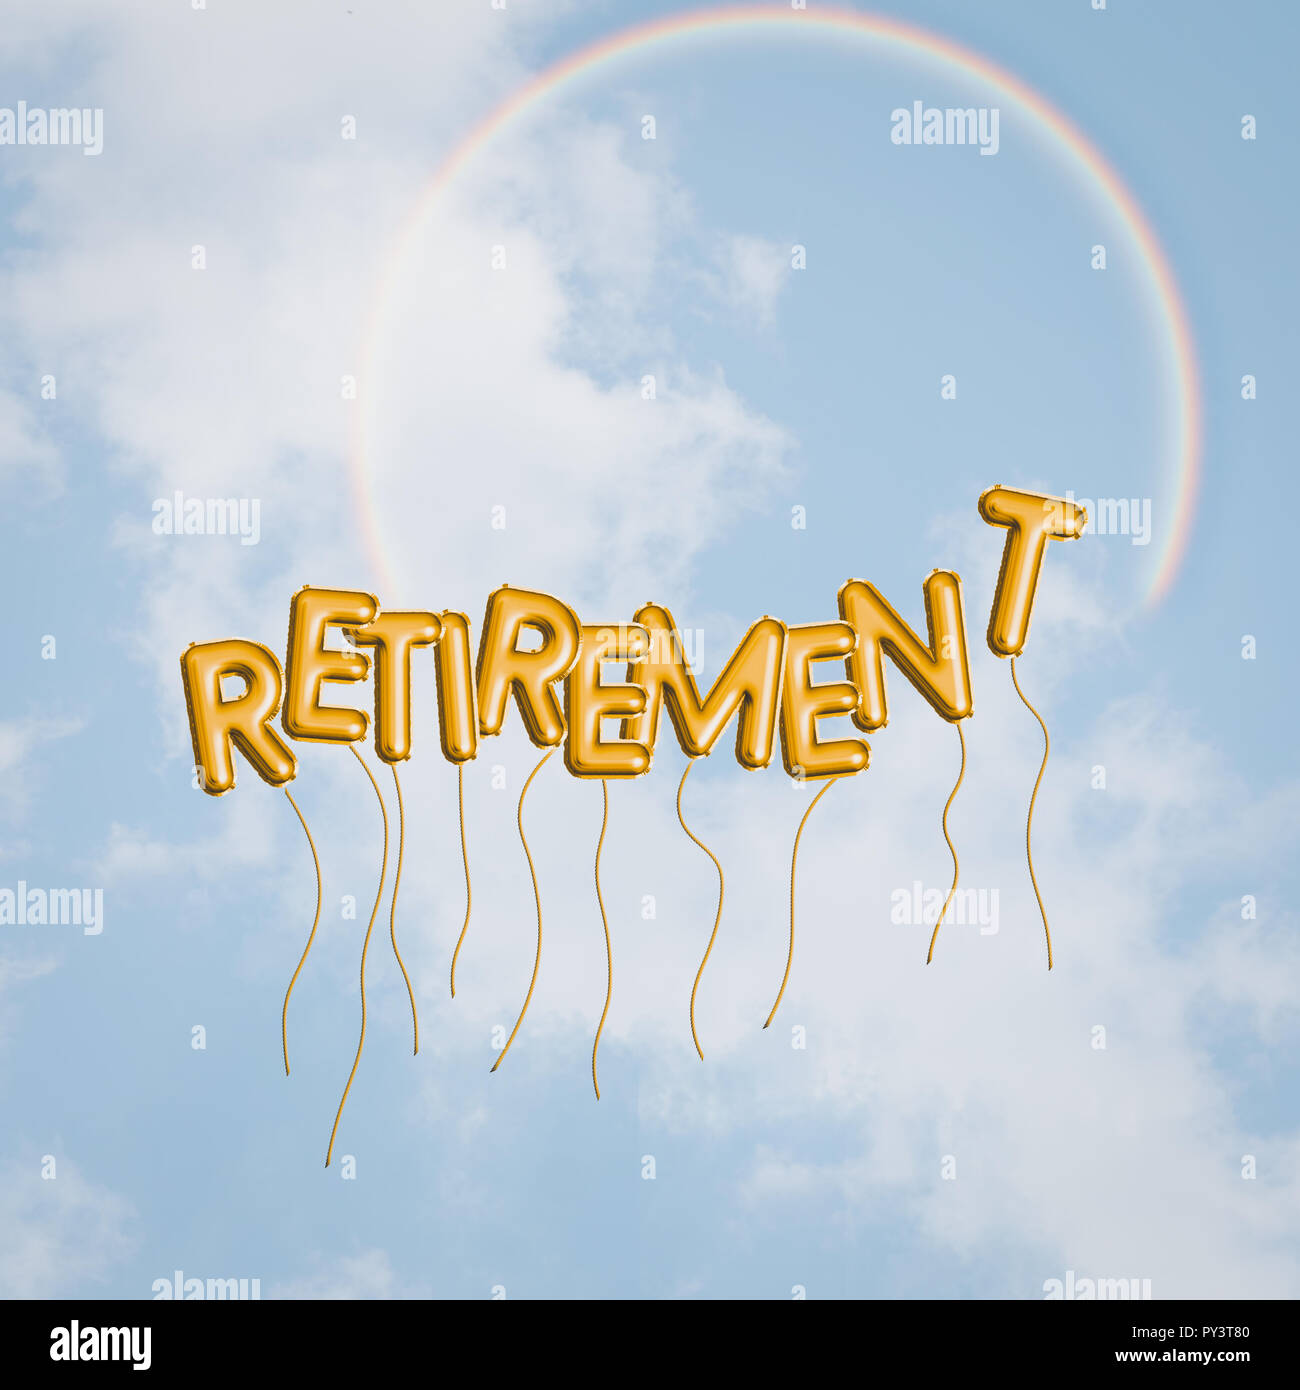 Happy retirement concept, blue sky, rainbow, balloons. Freedom, dreams and hopes with text word. Bright optimistic future. Stock Photo